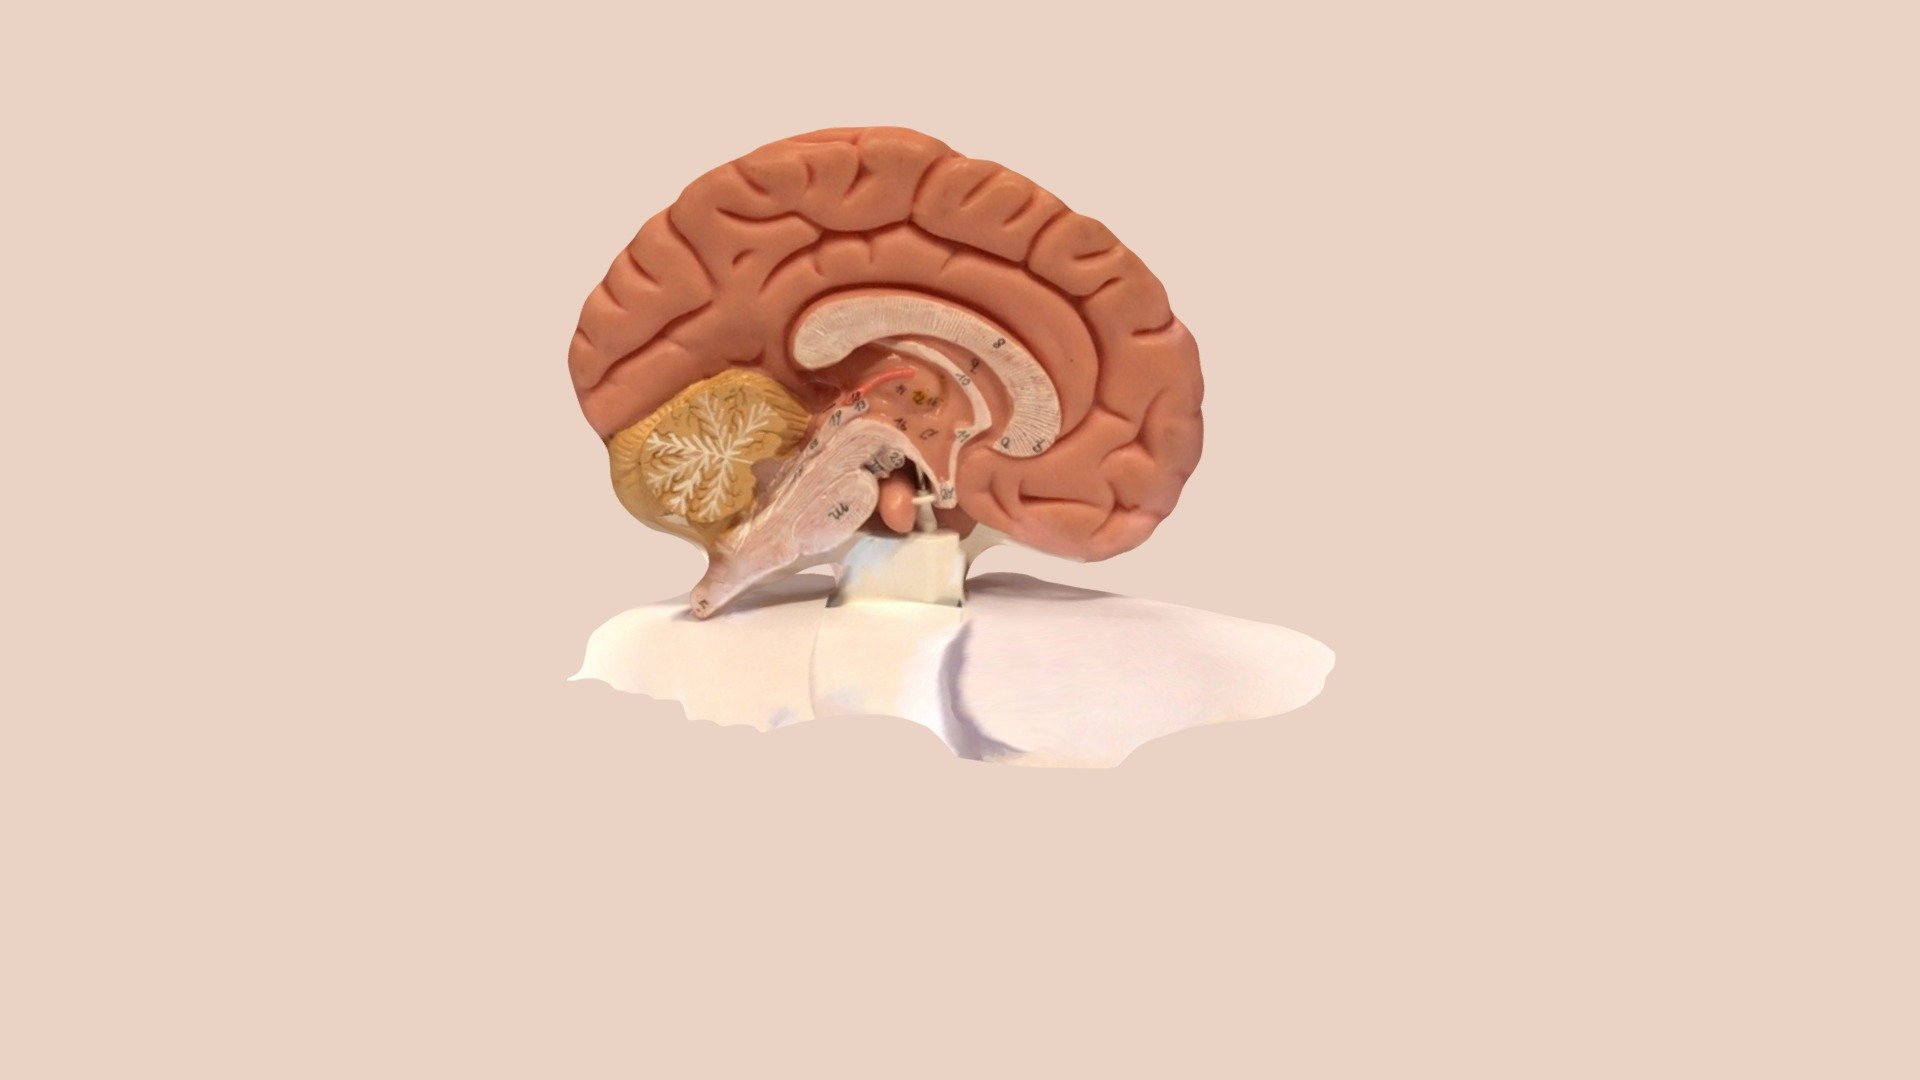 Anatomical model of a brain cross-section